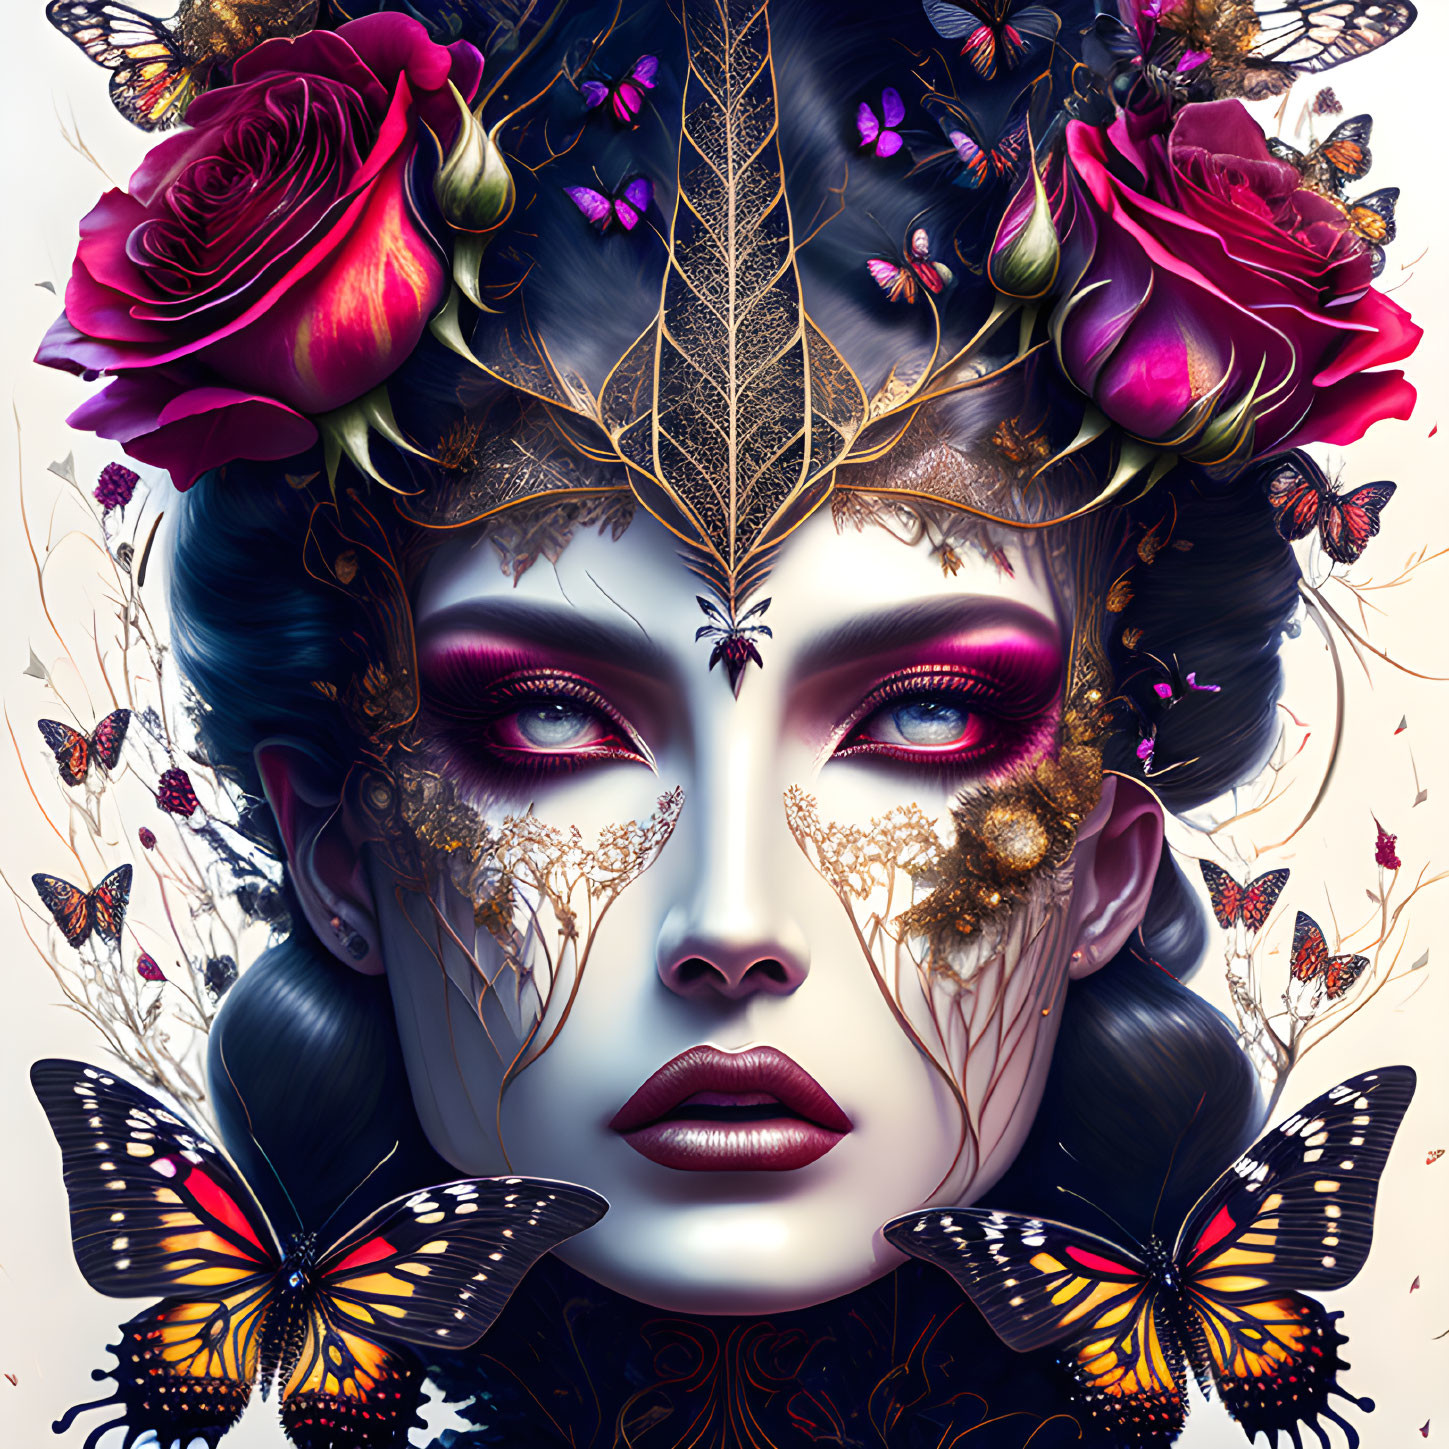 Stylized portrait of woman with flower crown and butterflies in vibrant purple hues